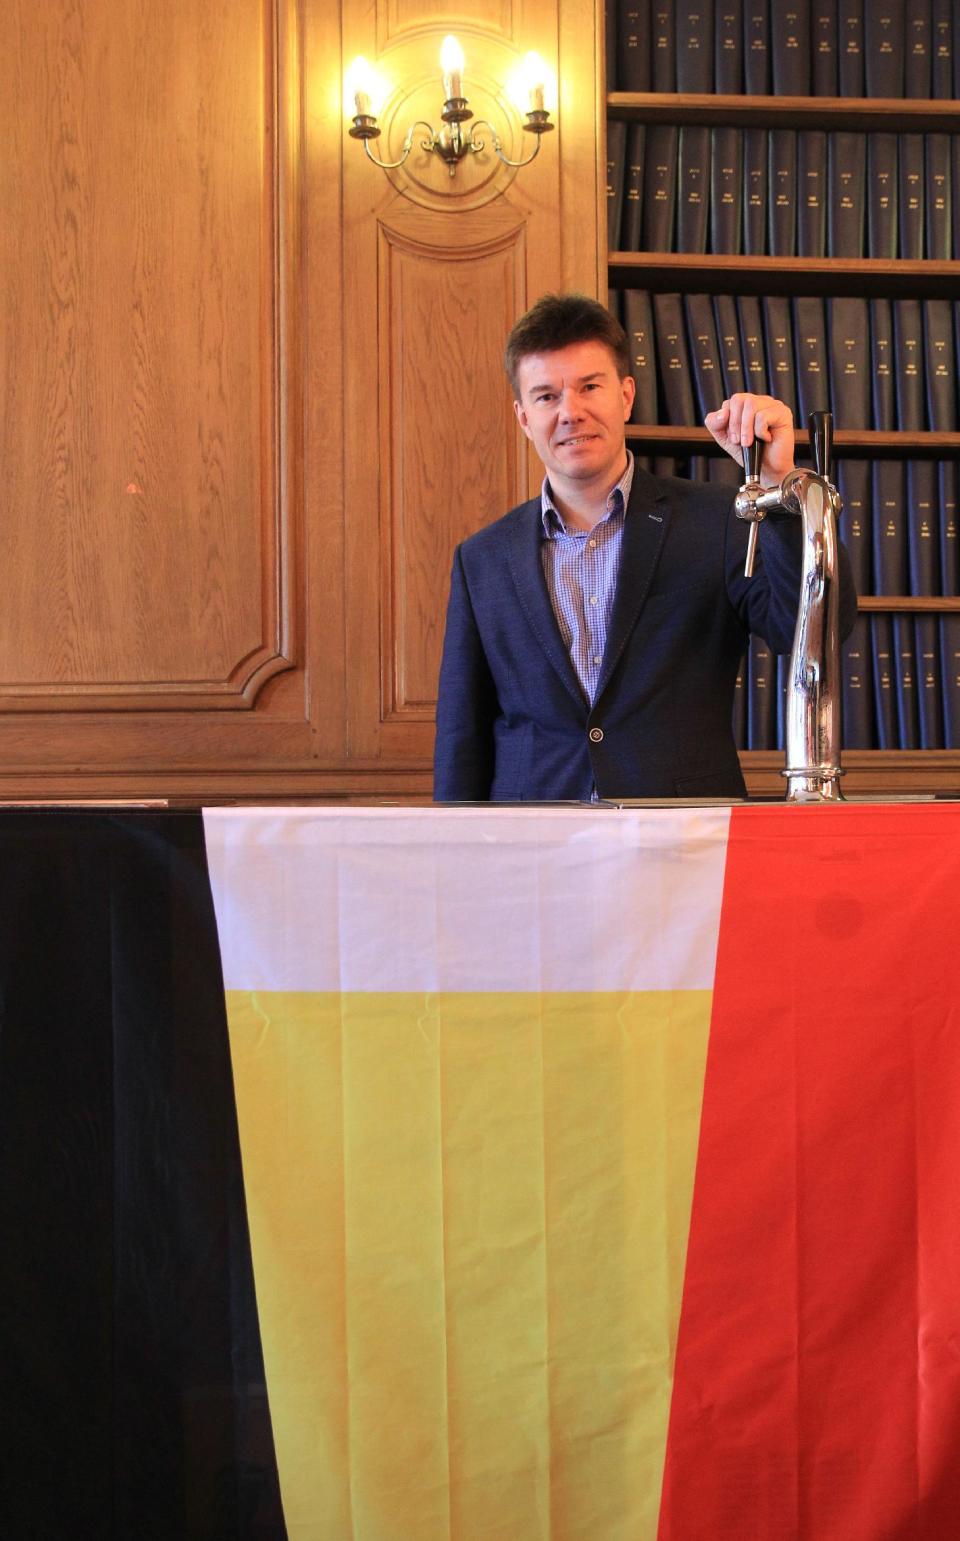 In this picture taken on Tuesday April 15, 2014, Sven Gatz, Head of the Belgian Brewers federation poses behind the Belgian tricolour, evoking a glass of beer, in Brussels. Thousands of bars in Belgian towns and villages have closed over the past decades, and on top of it, Belgians have stopped drinking like they used to. Now they have foreigners pick up the slack to keep the beer industry going. (AP Photo/Yves Logghe)